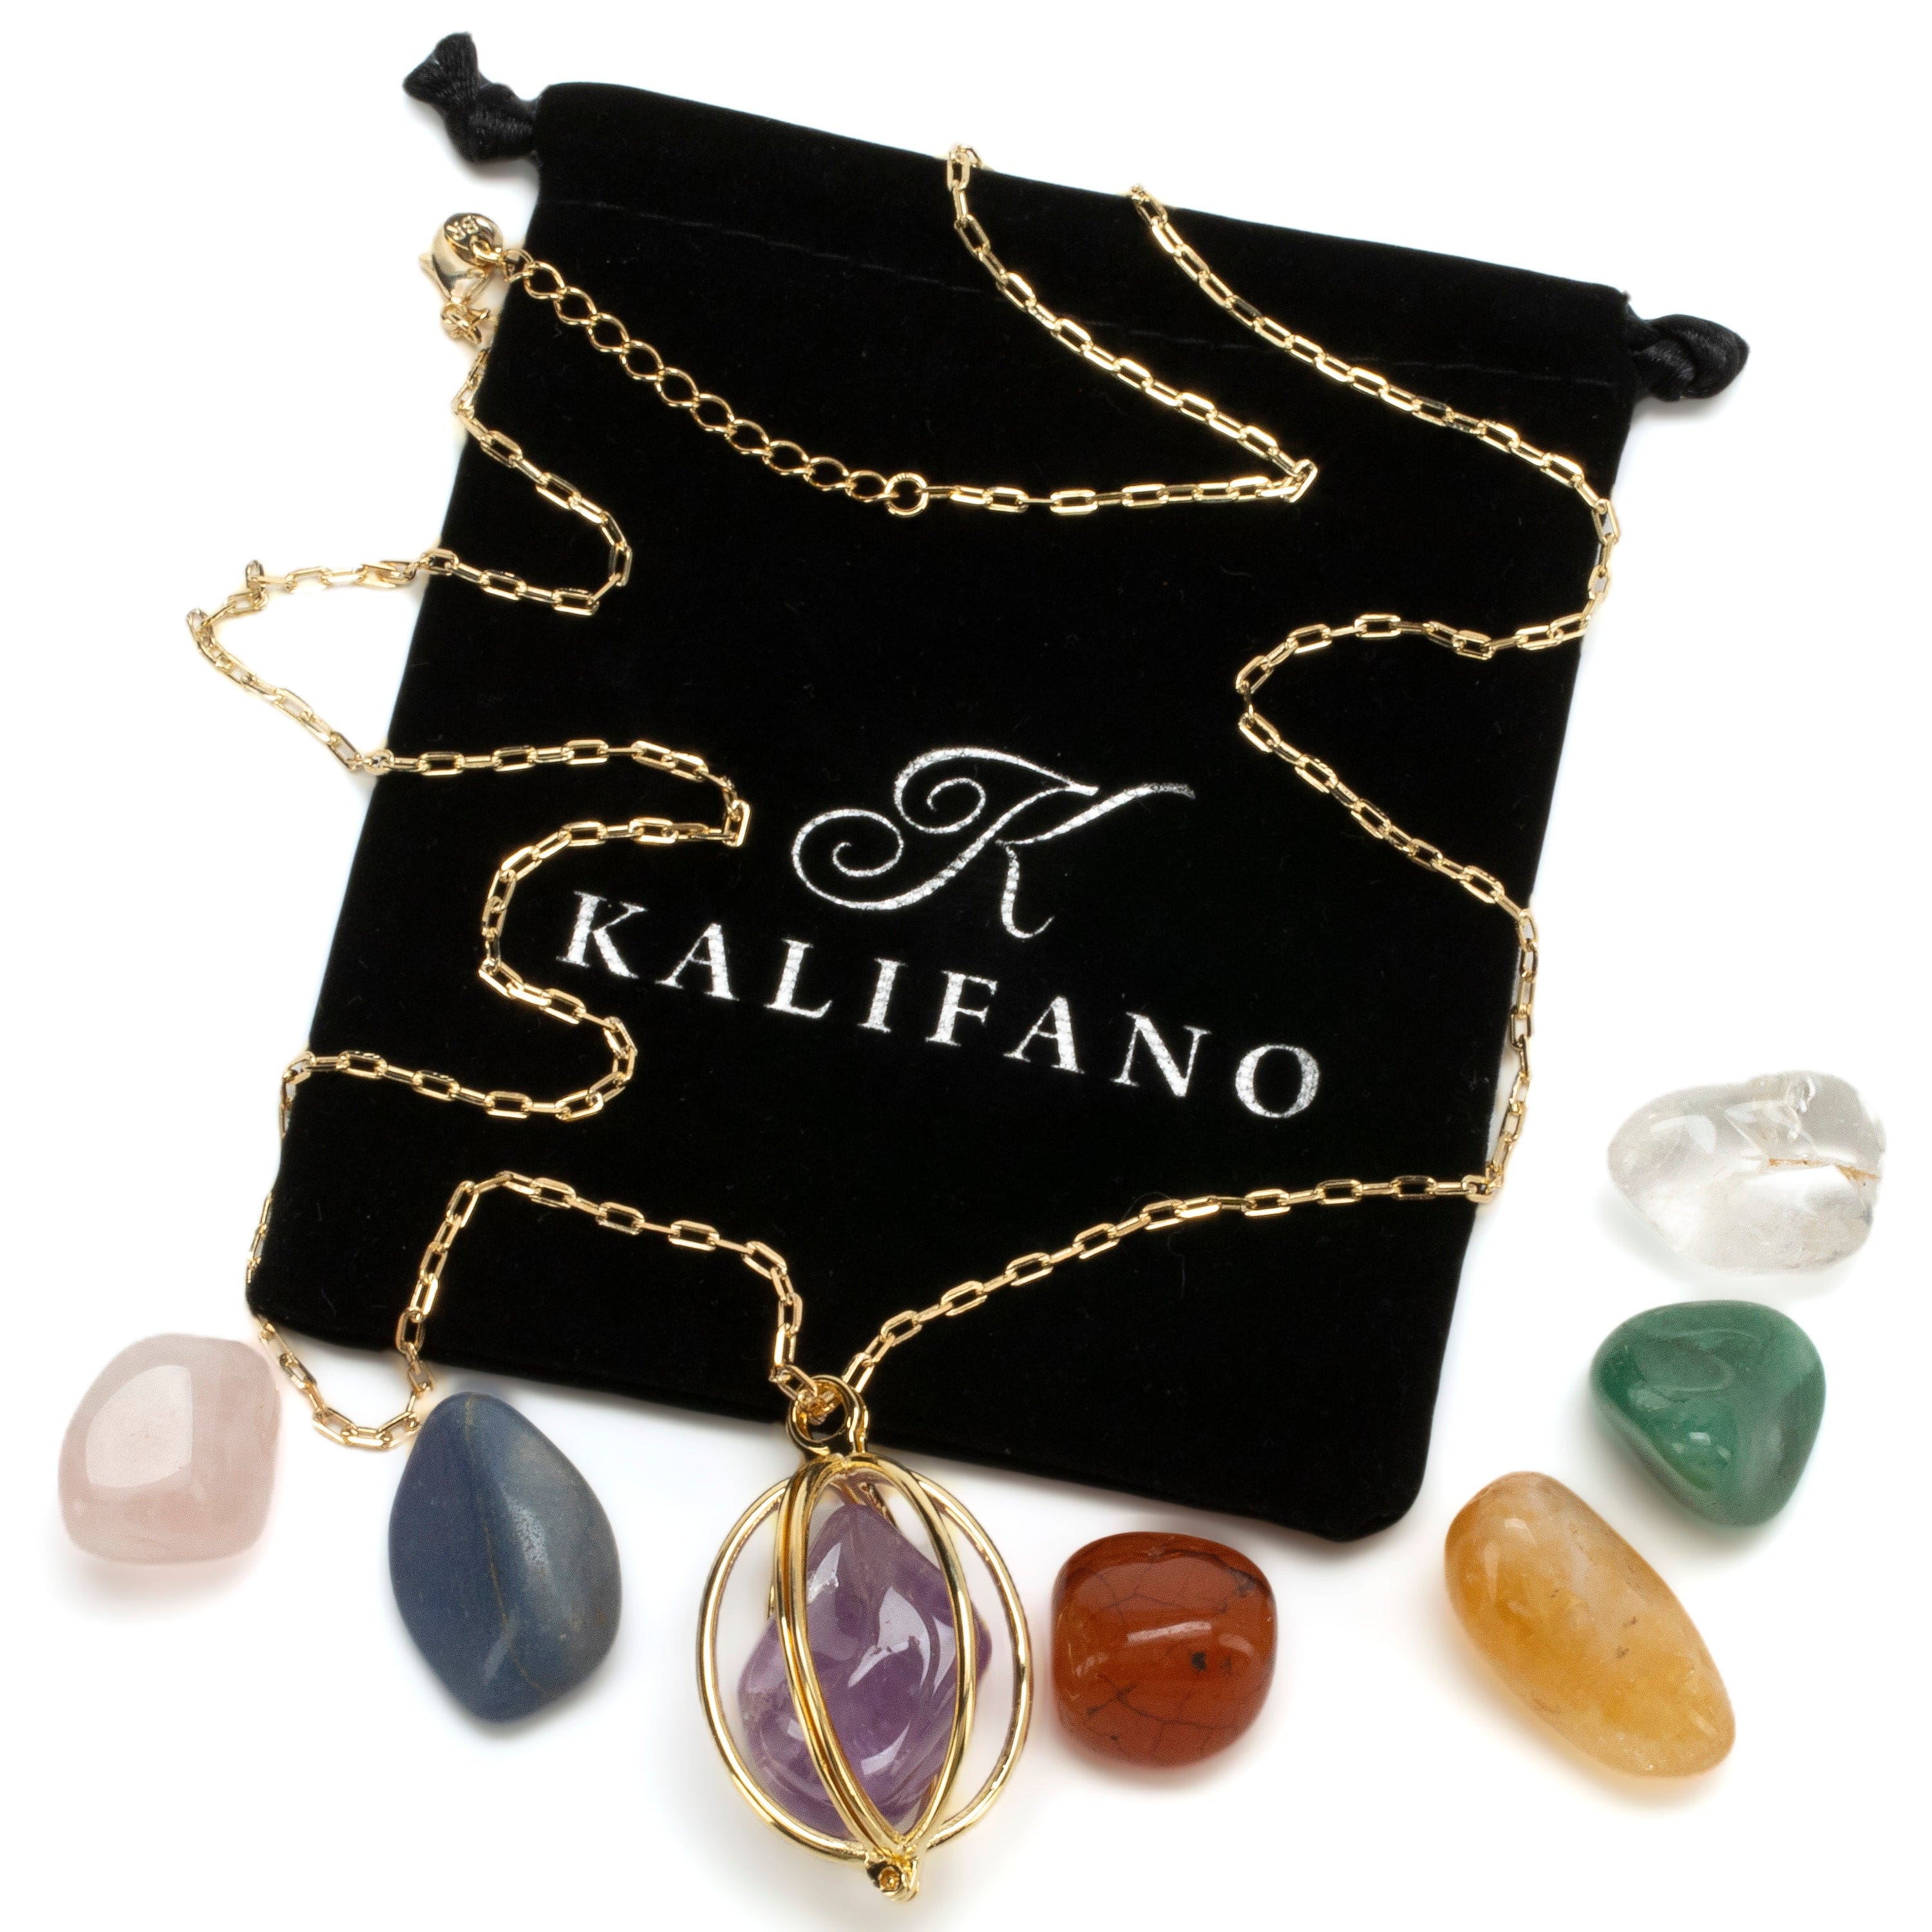 Kalifano Crystal Jewelry Gold Toned Convertible Chakra Pendant with Replaceable Tumbled Stones CJN-2057G-MT